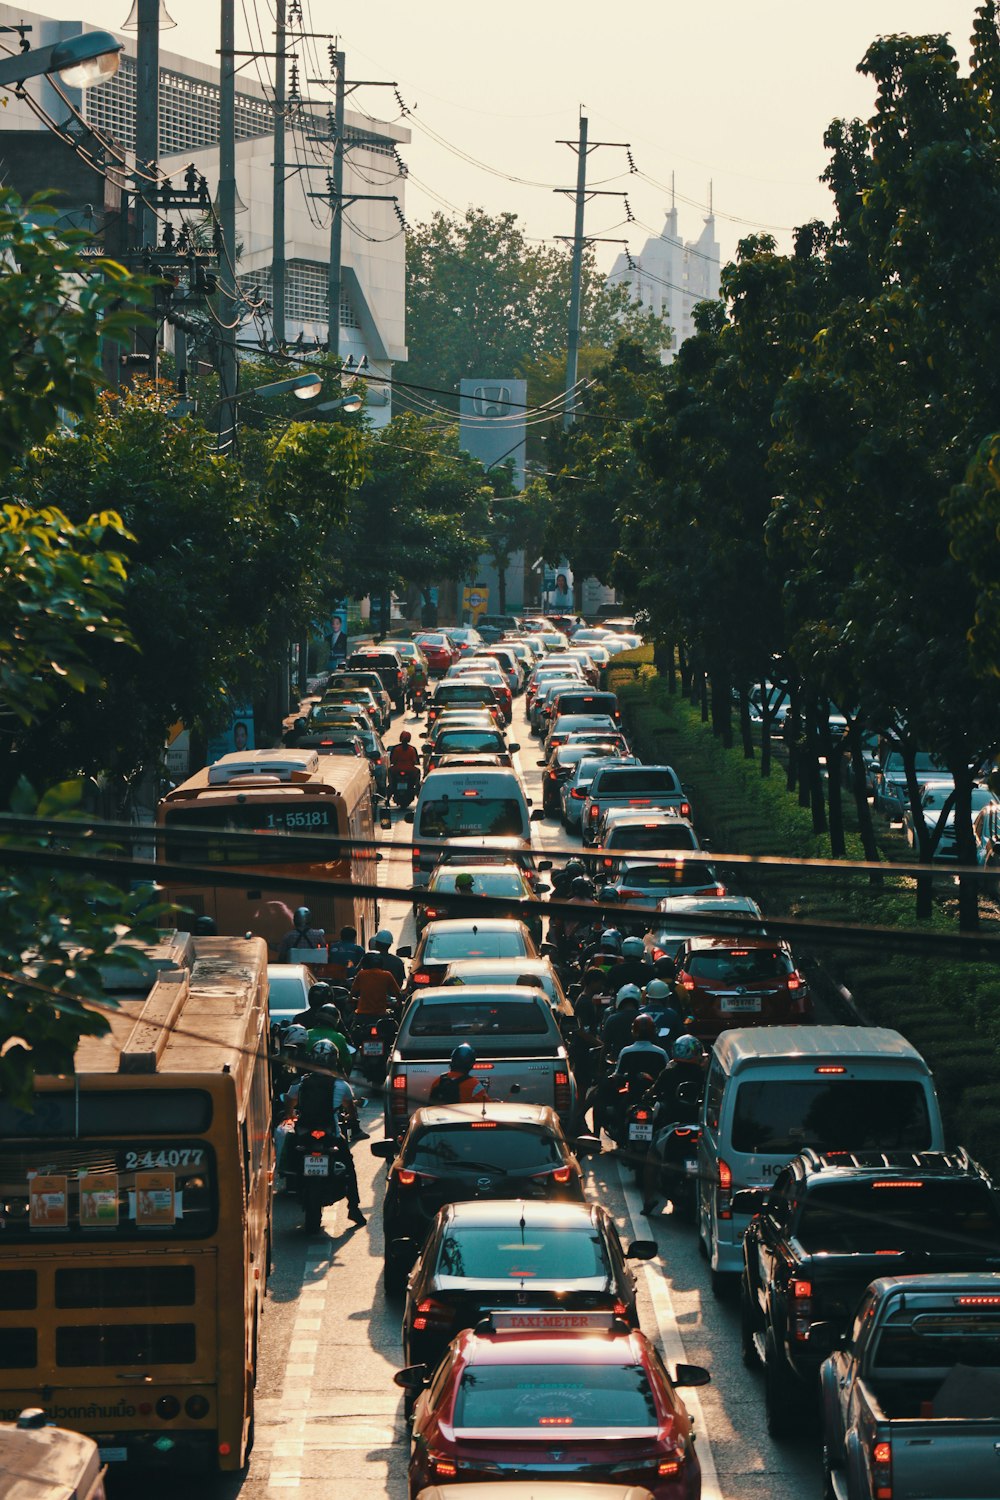 a busy street filled with lots of traffic